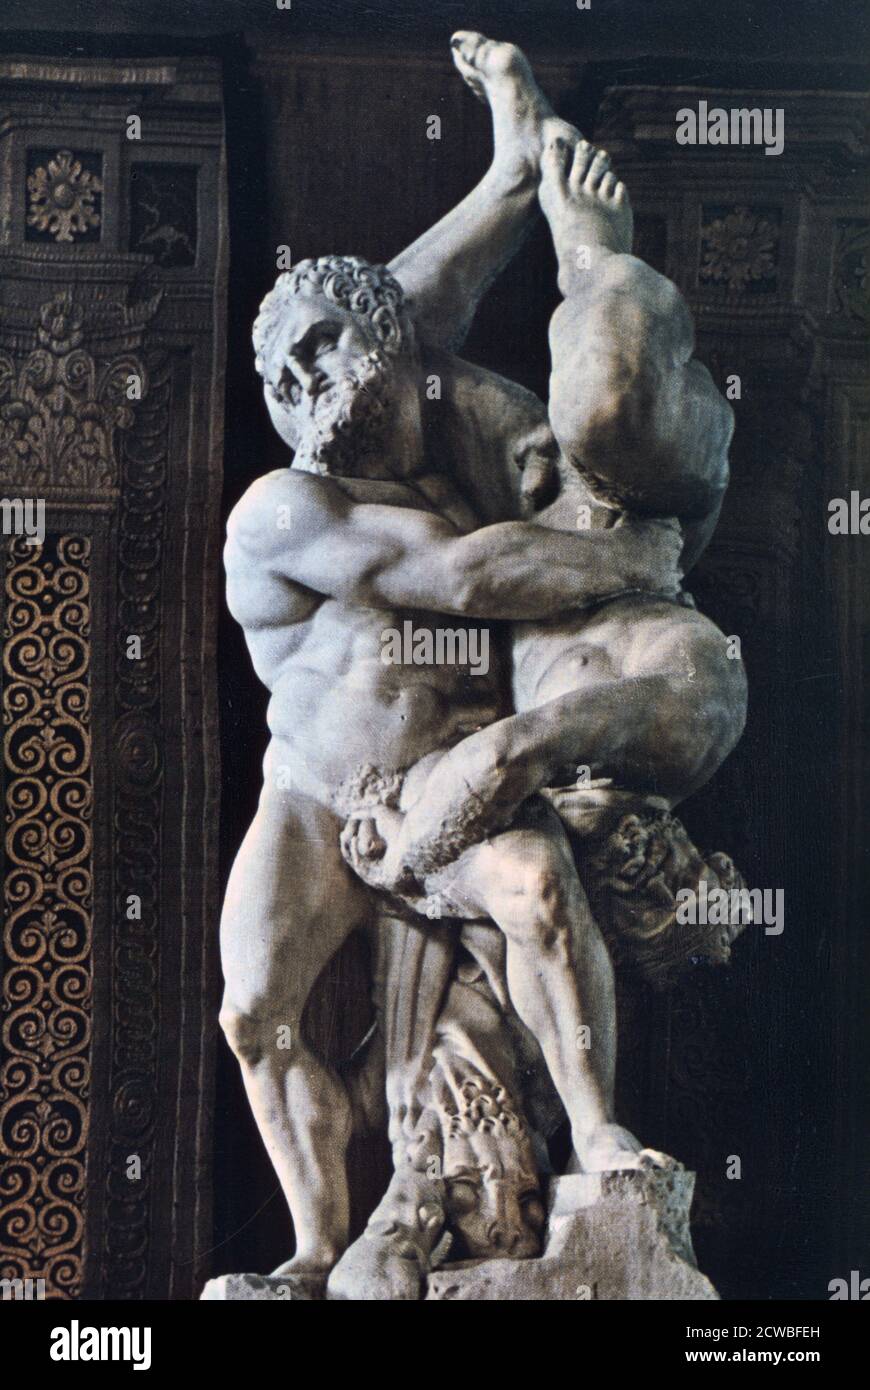 Hercules and Diomede', c mid 16th century (?) by Vincenzo di Raffaello de Rossi. From the Room of the 500, Palazzo Vecchio, Florence, Italy. Stock Photo